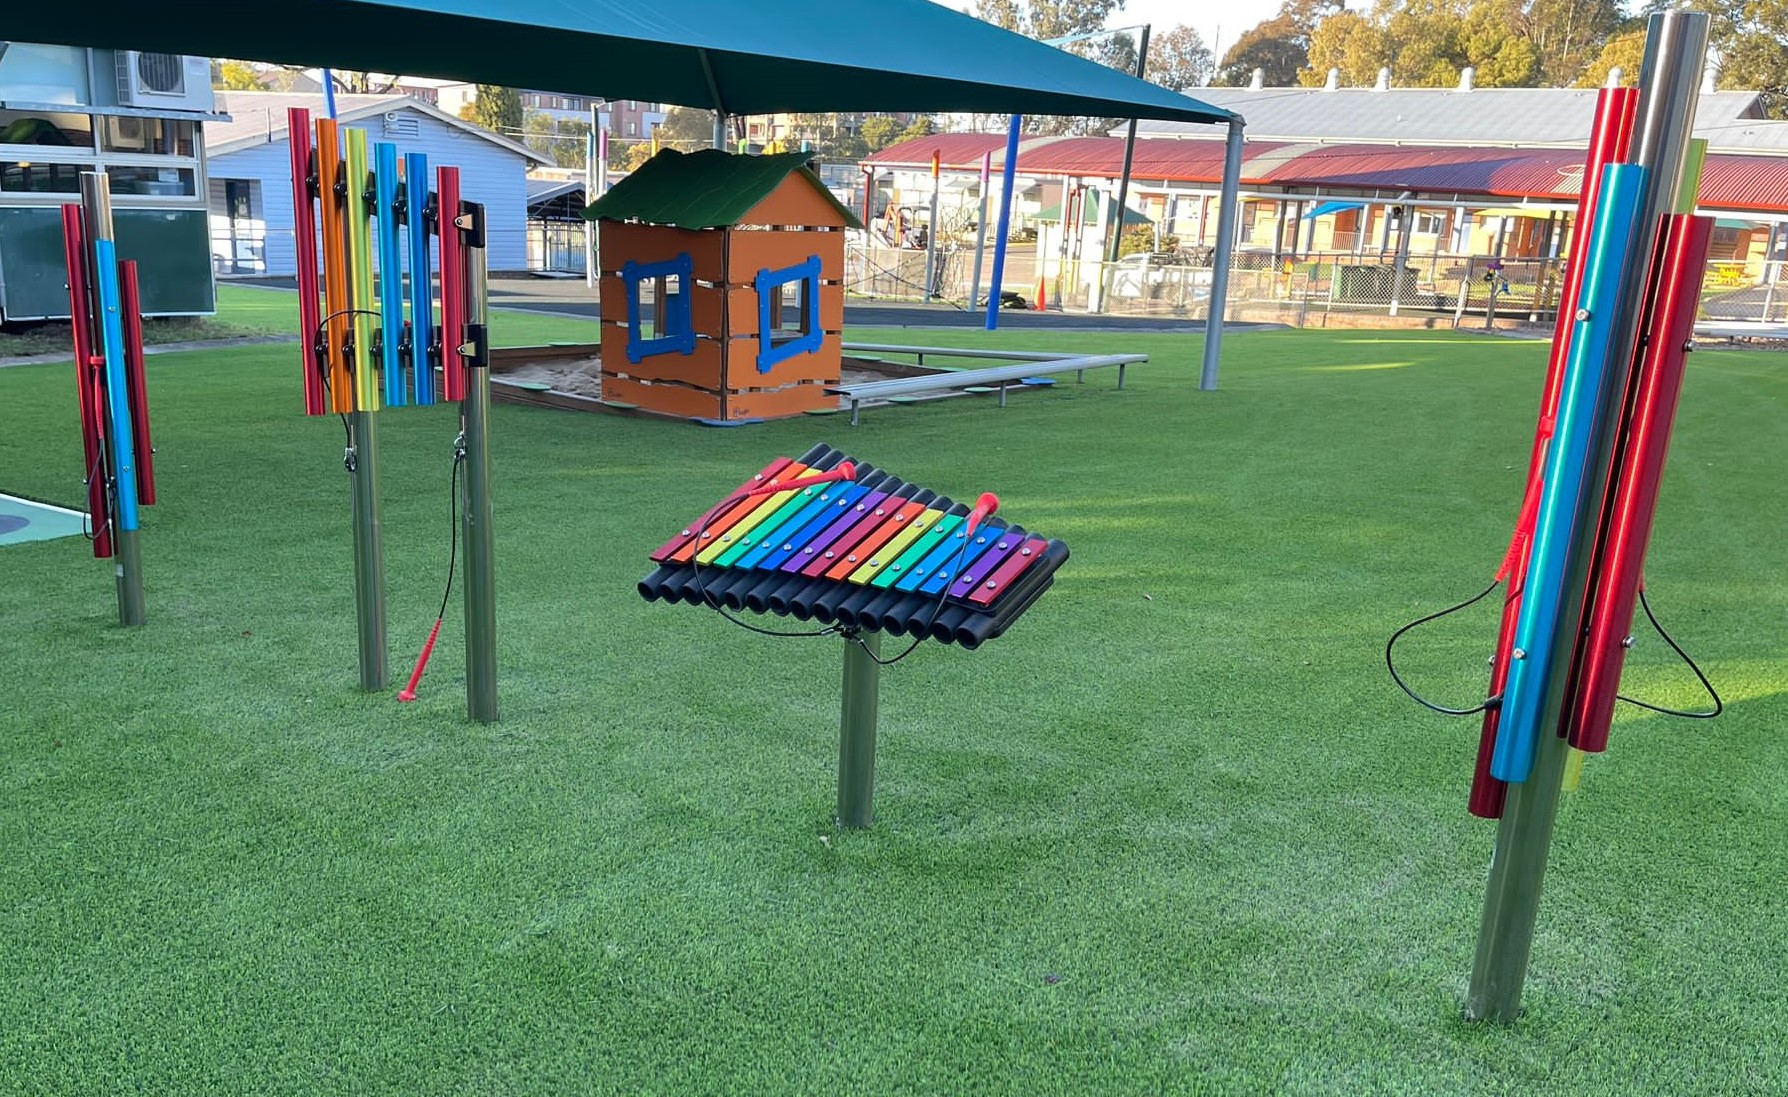 Outdoor Musical Instruments installed in a school playground